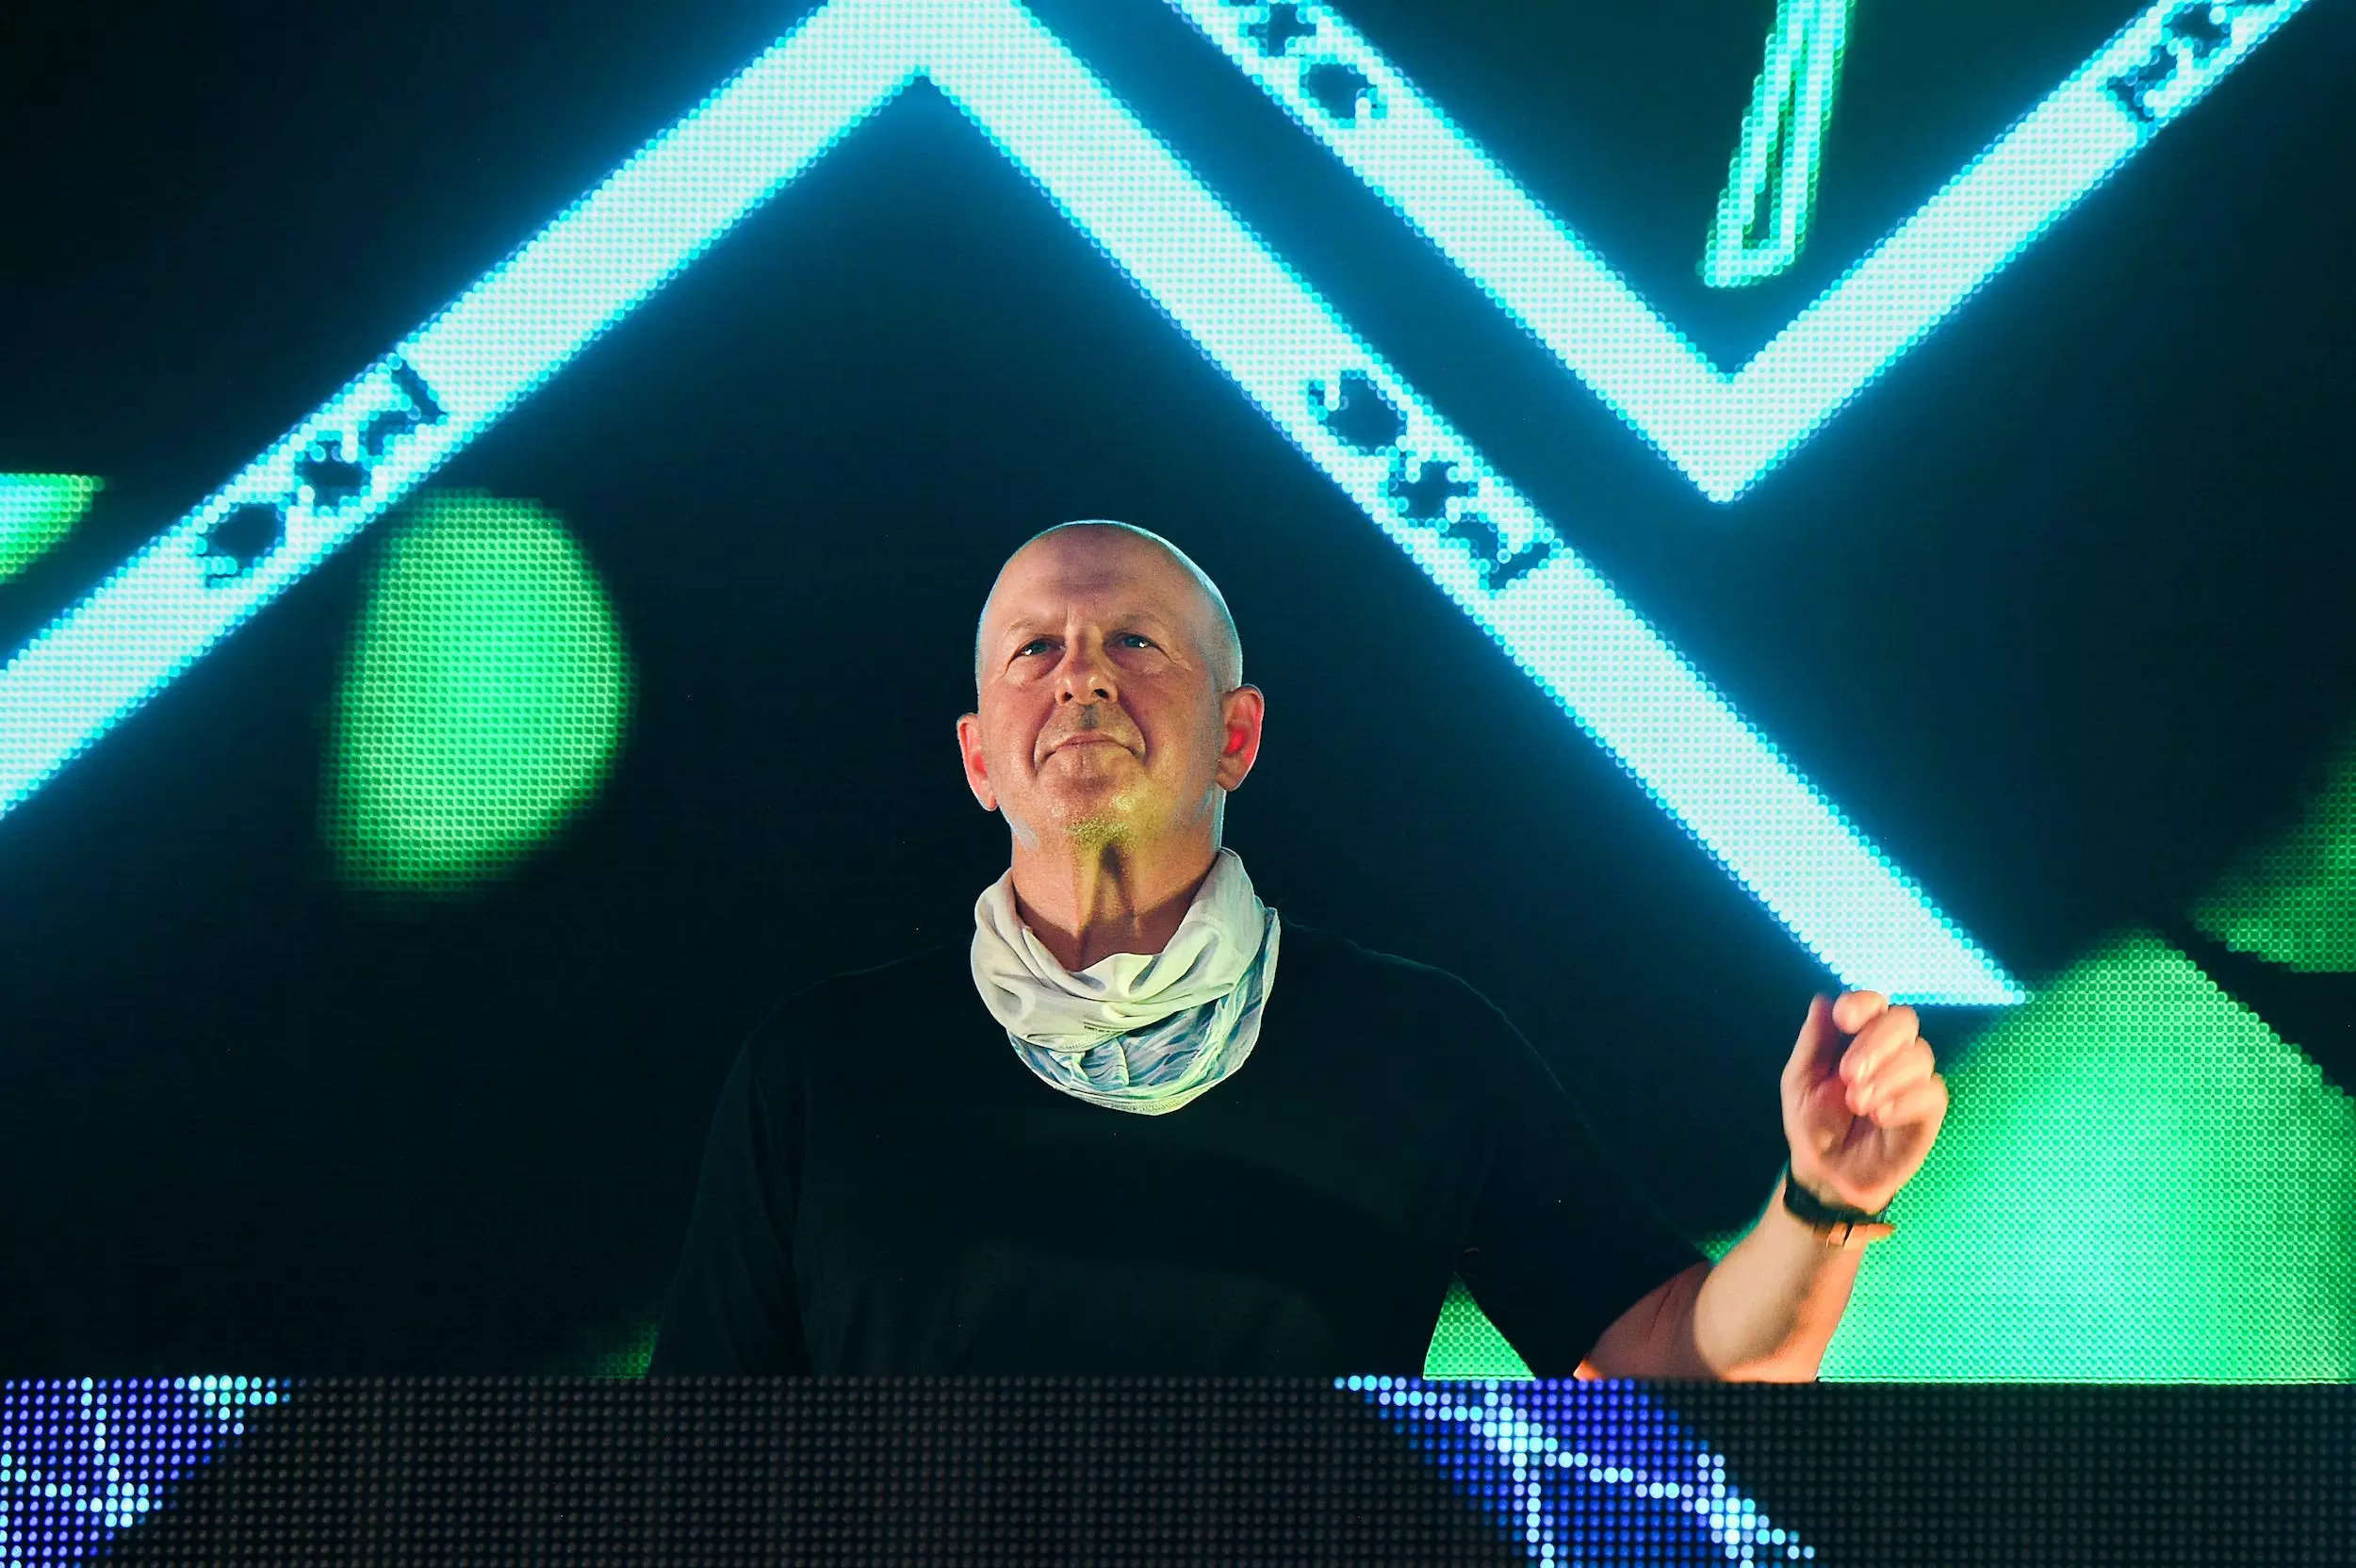 Goldman Sach’s David Solomon says he nonetheless DJs as a ‘pastime’ — however will not let his ‘ardour’ distract from his day job